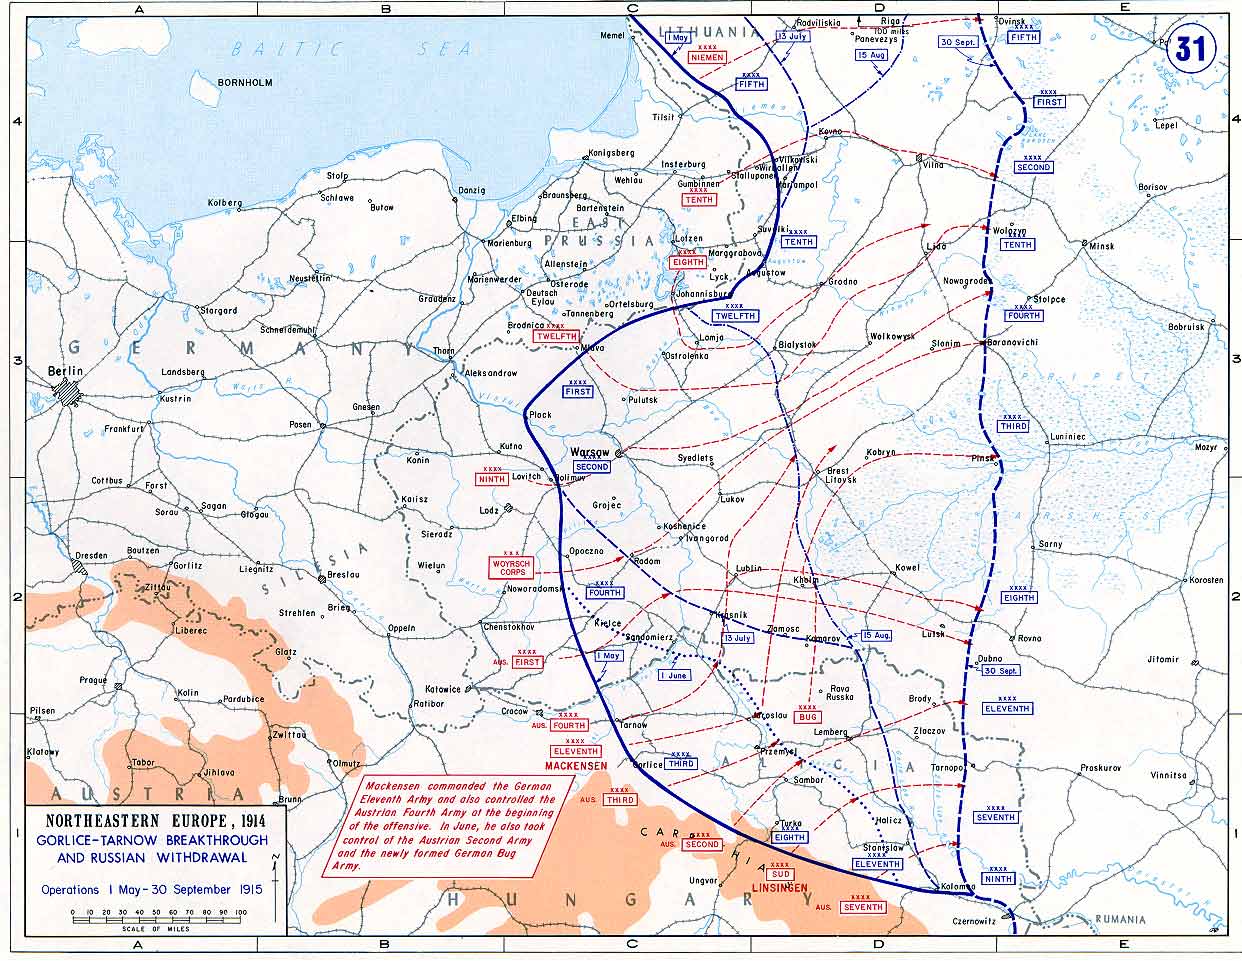 The Great Retreat at the Eastern Front - Image: Public Domain